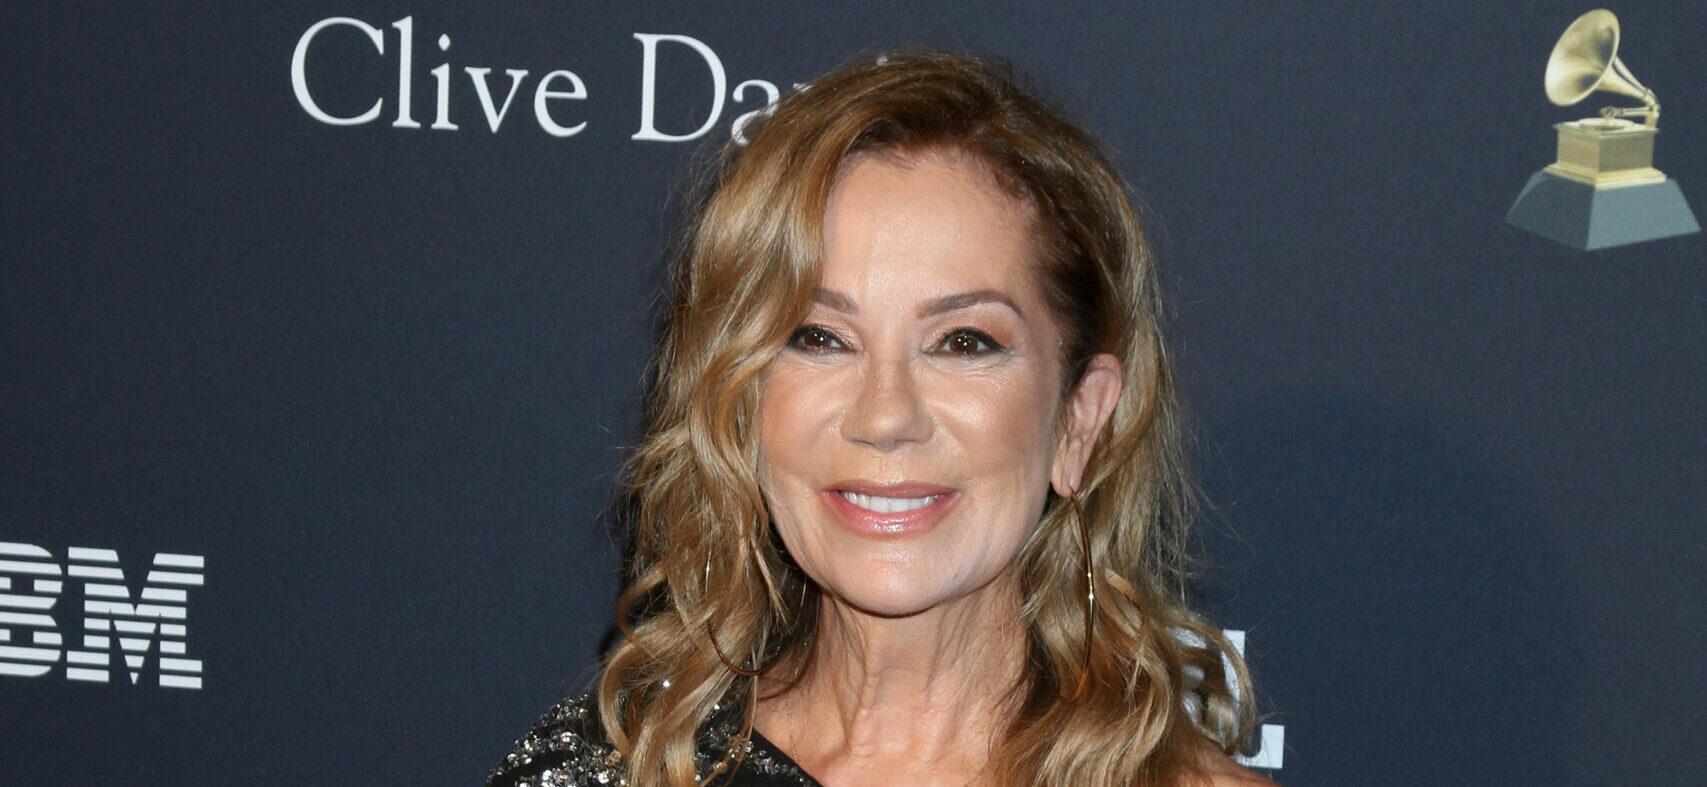 Kathie Lee Gifford at the 2020 Clive Davis Pre-Grammy Party